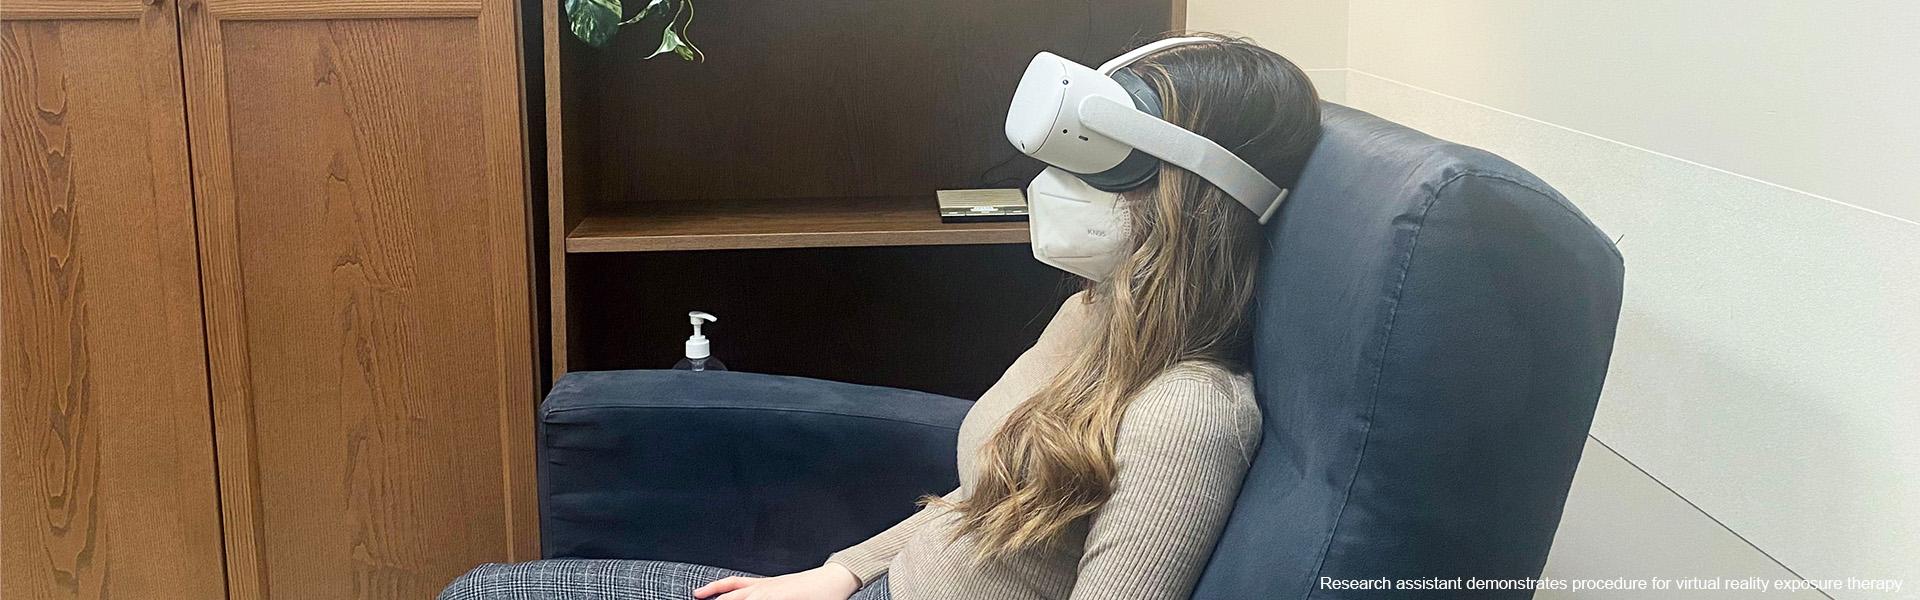 Photo of research assistant demonstrating procedure for virtual reality exposure therapy